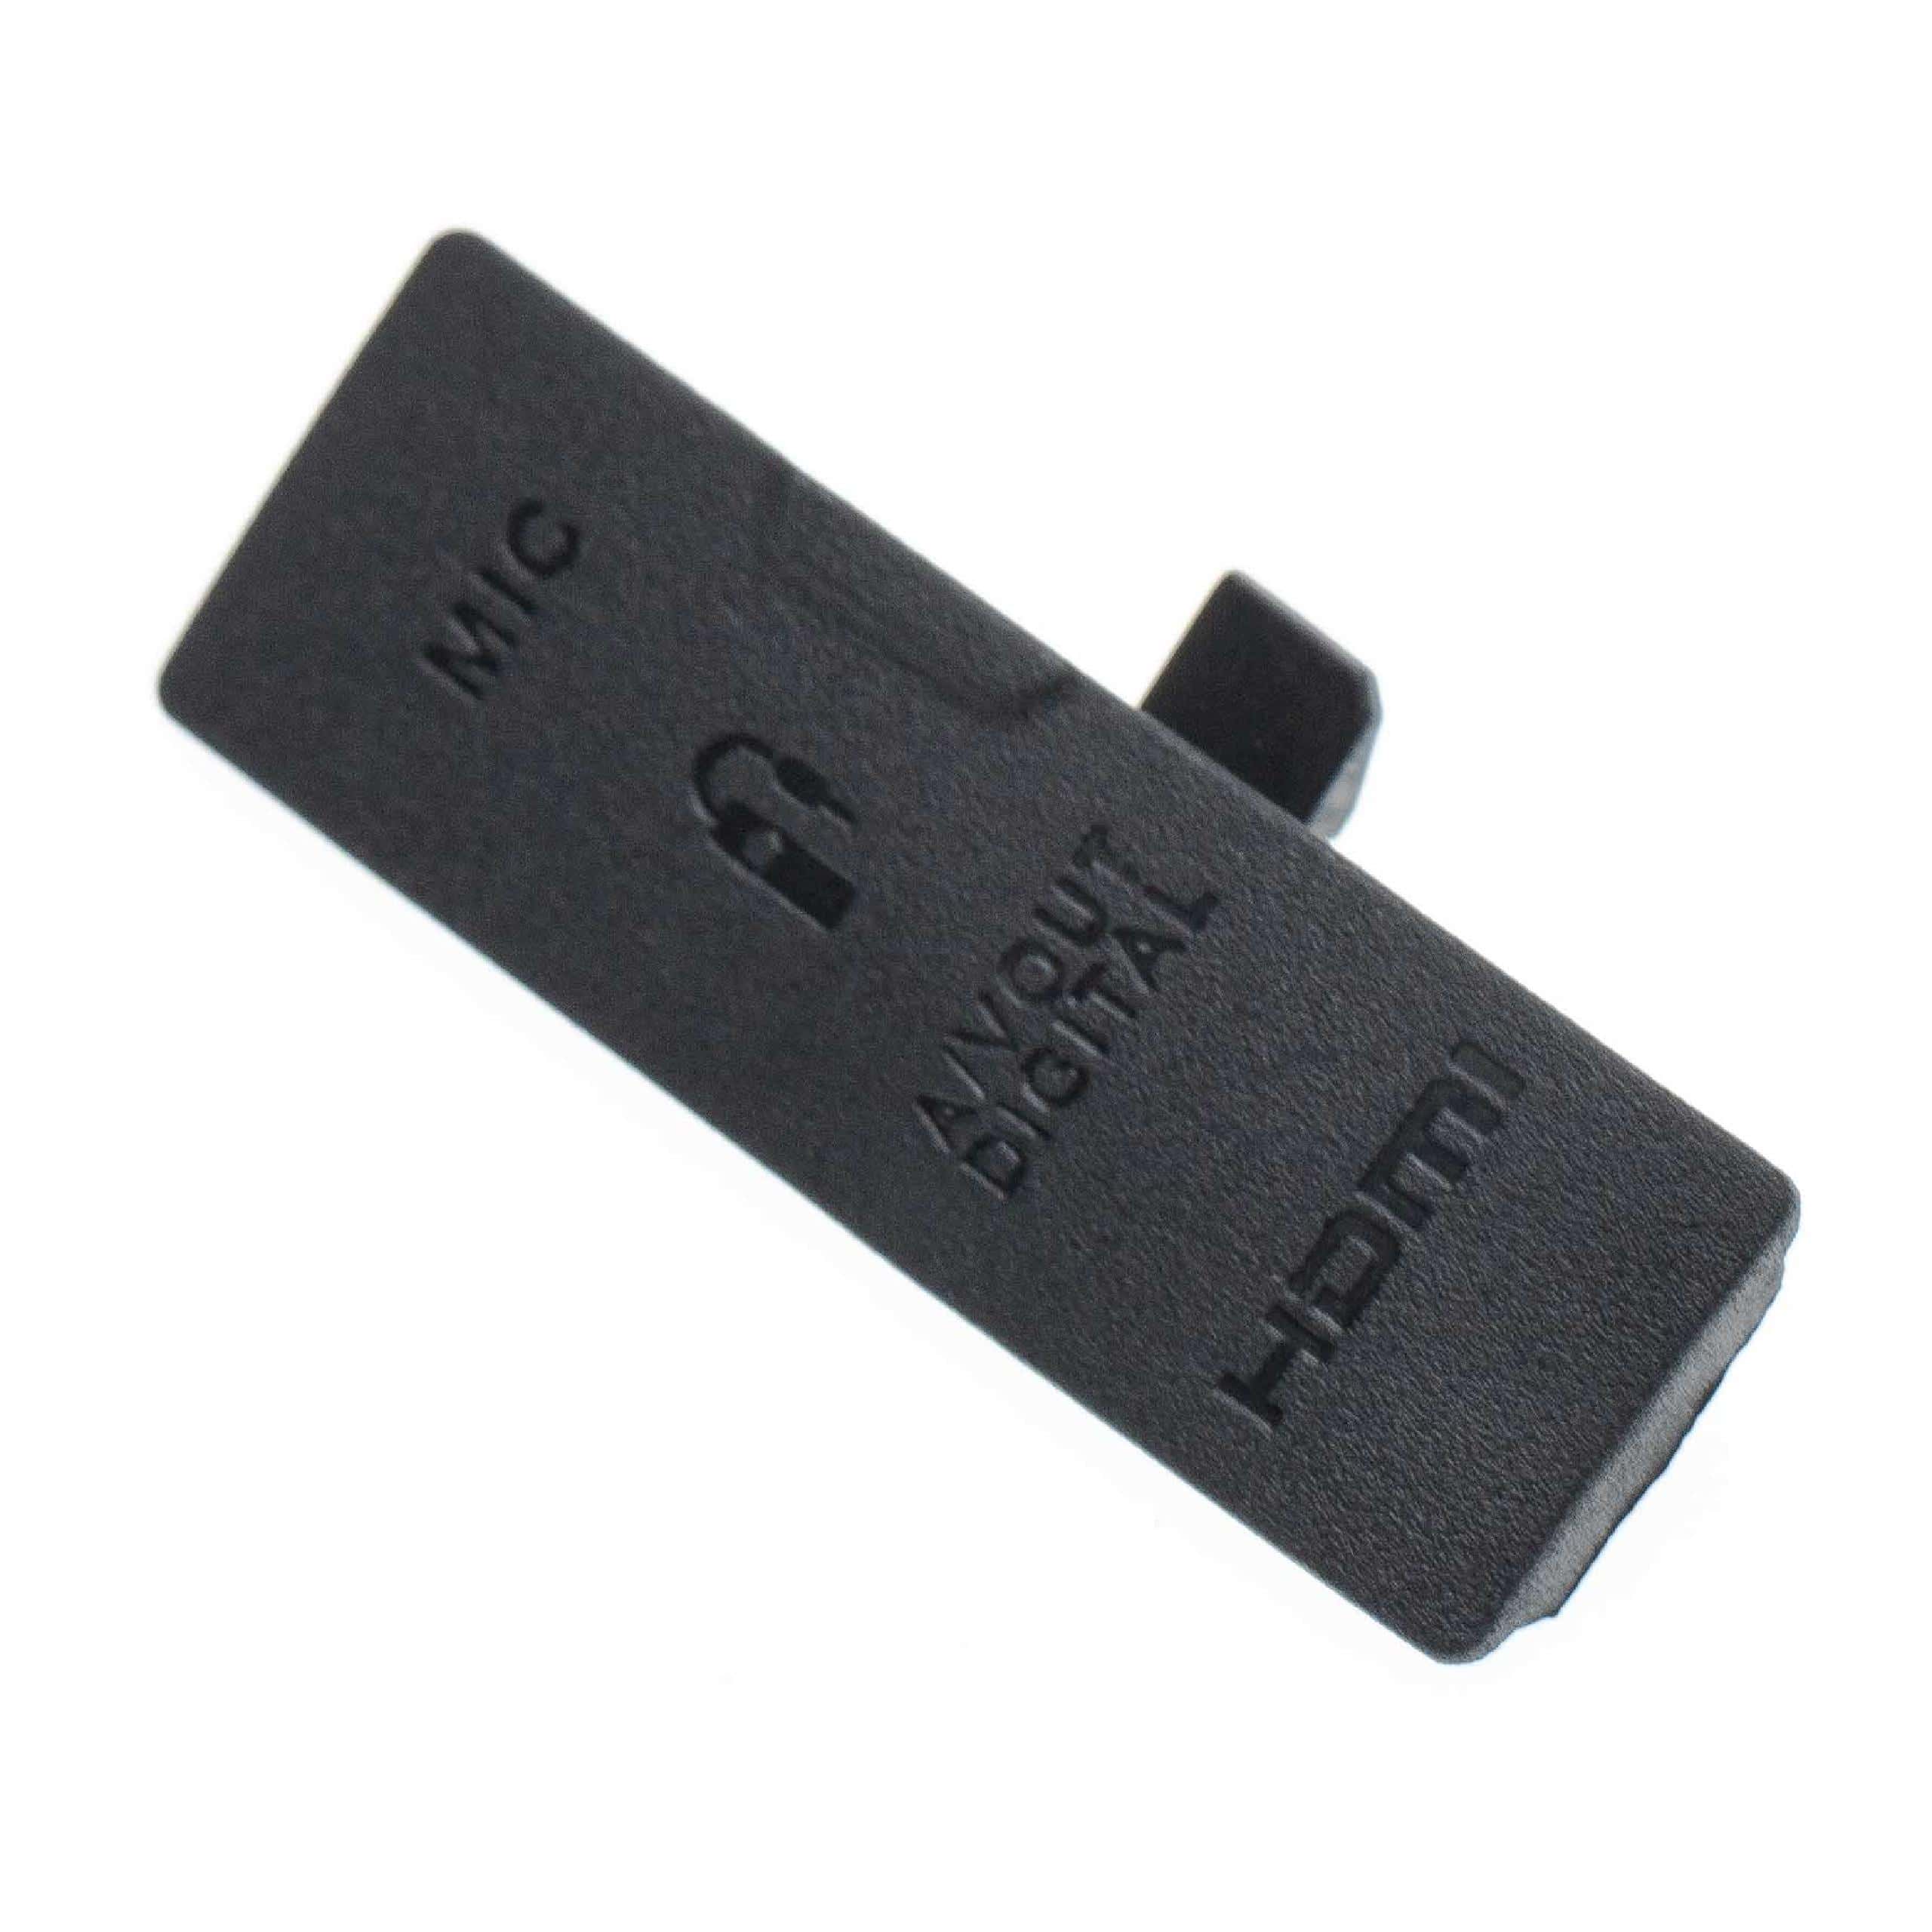 Terminal Cap suitable for Canon EOS 550D, Rebel T2i, Kiss X4 DSLR Camera - For USB/HDMI Connection